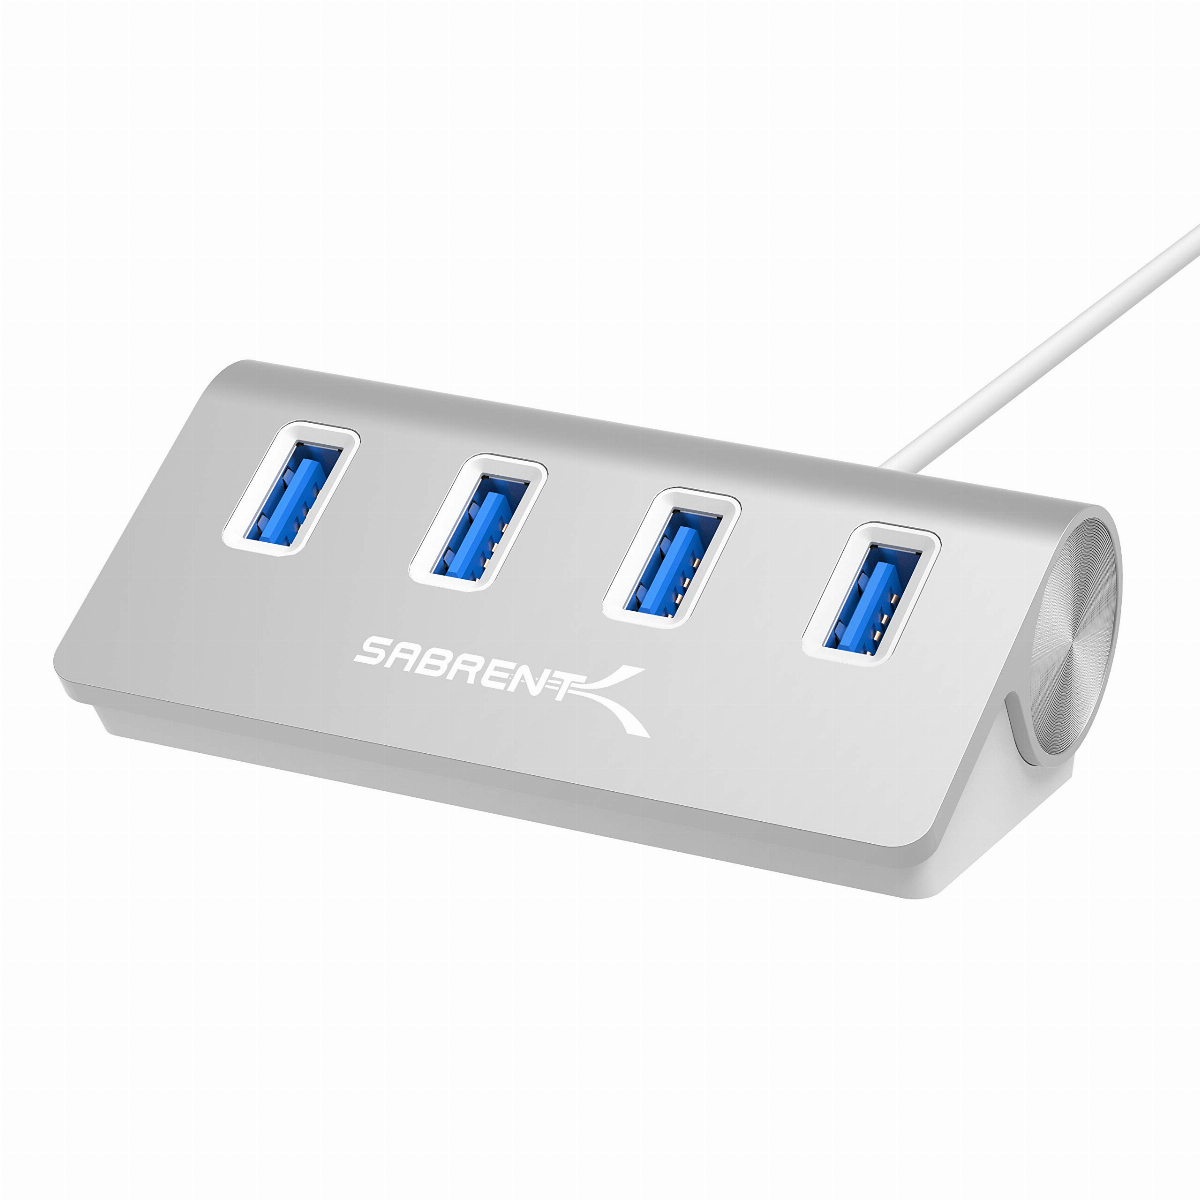 additional usb port for mac book air